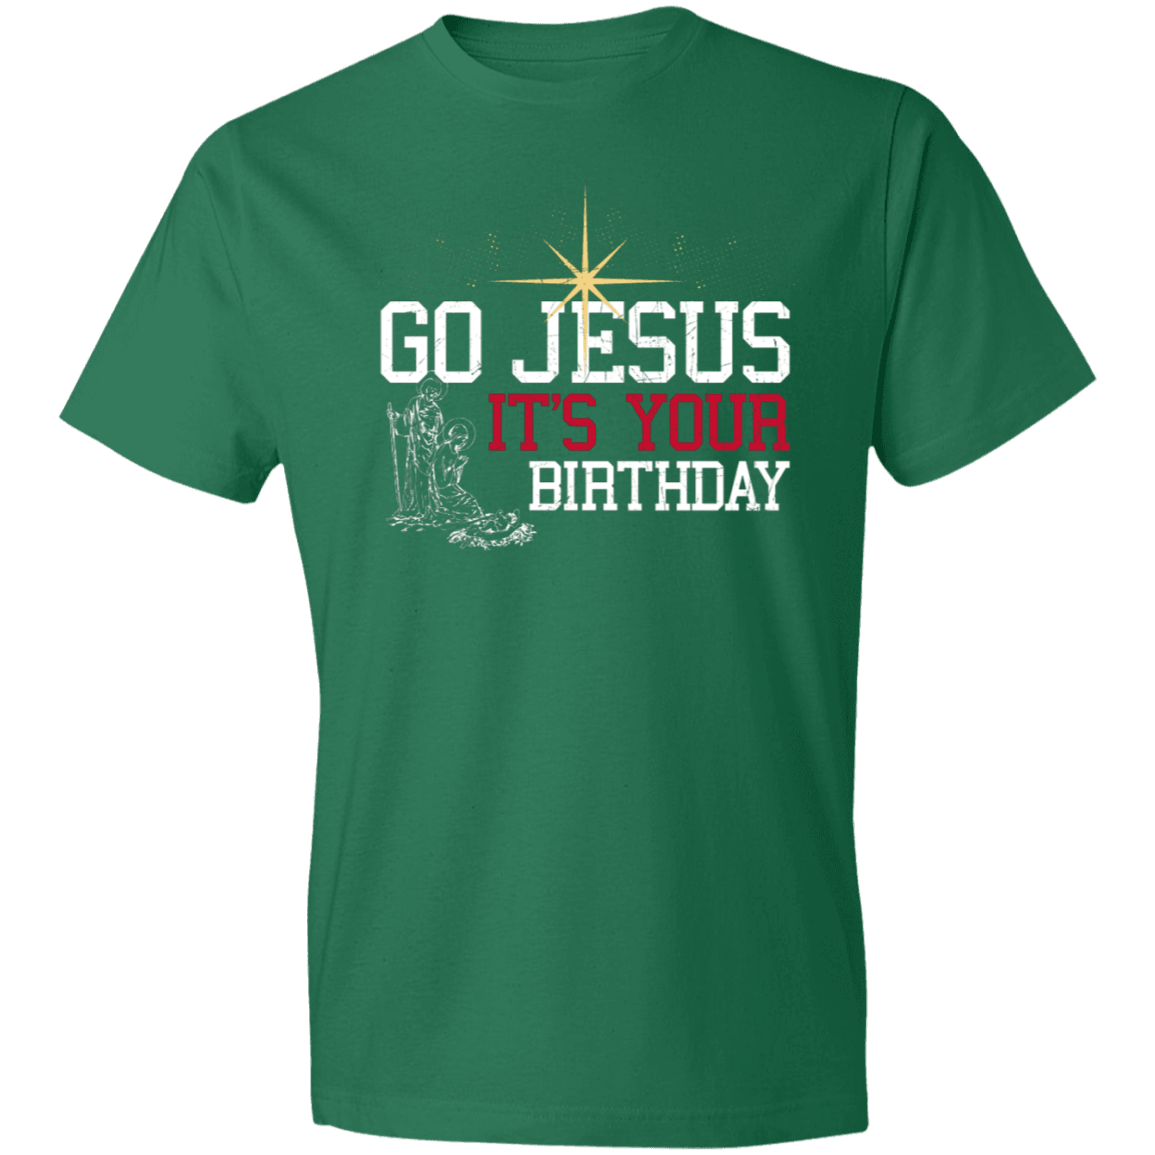 Designs by MyUtopia Shout Out:Go Jesus Its Your Birthday - Lightweight T-Shirt,Kelly Green / S,Adult Unisex T-Shirt